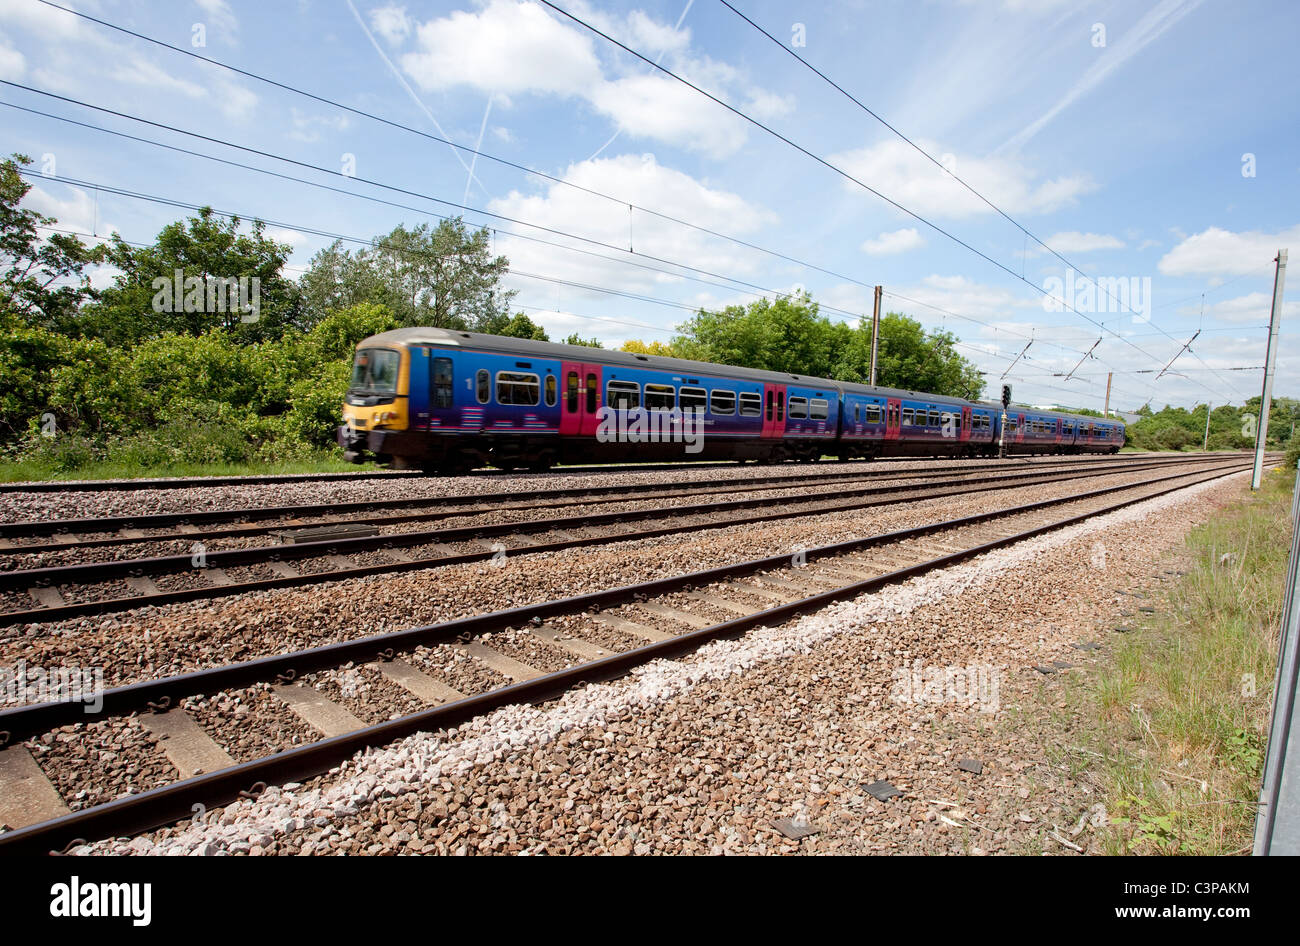 First Great Western Train at Barnet London Stock Photo